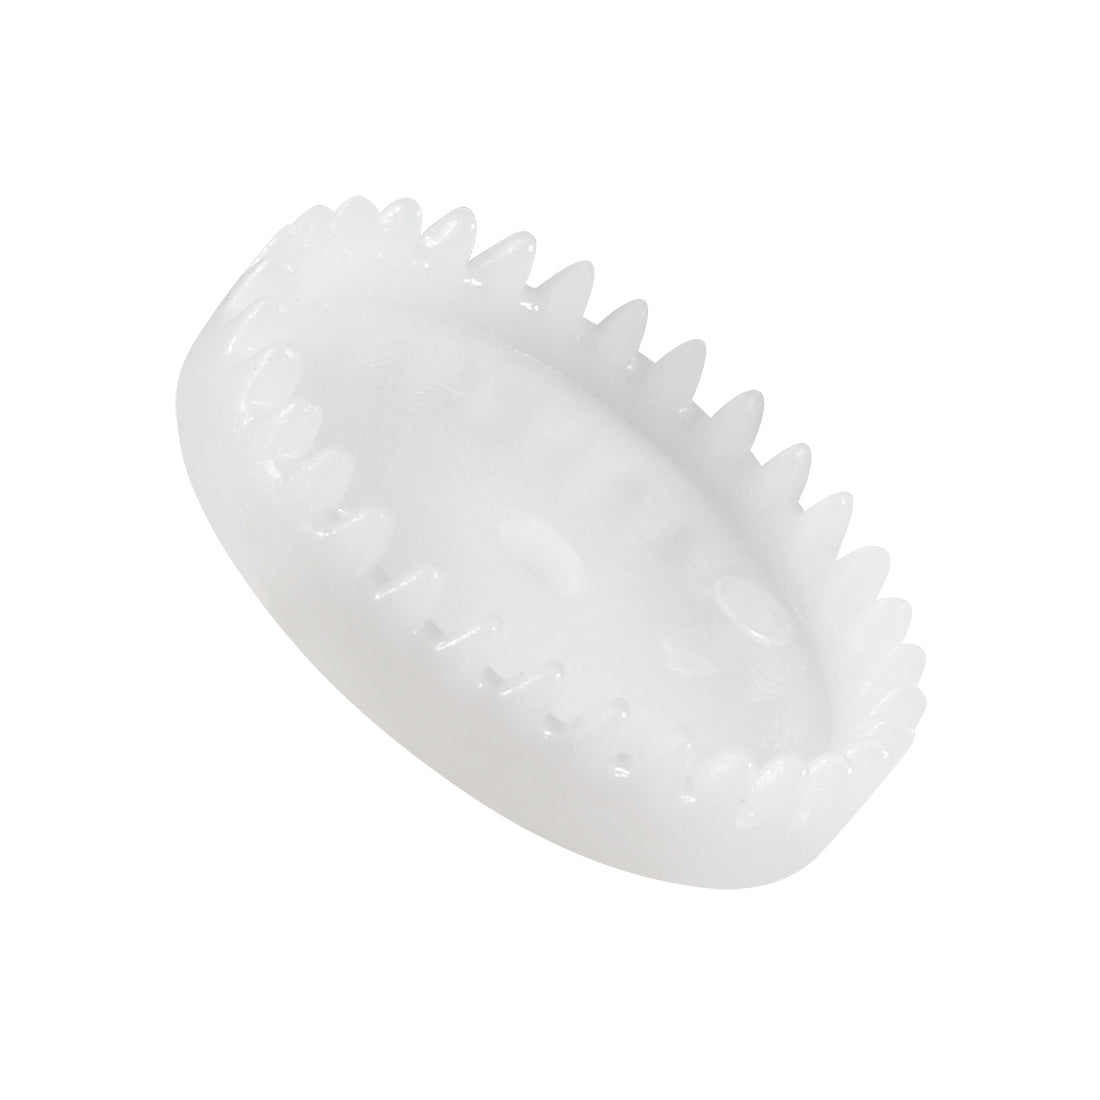 uxcell Uxcell 20Pcs C322A Plastic Gear Accessories with 32 Teeth for DIY Car Robot Motor